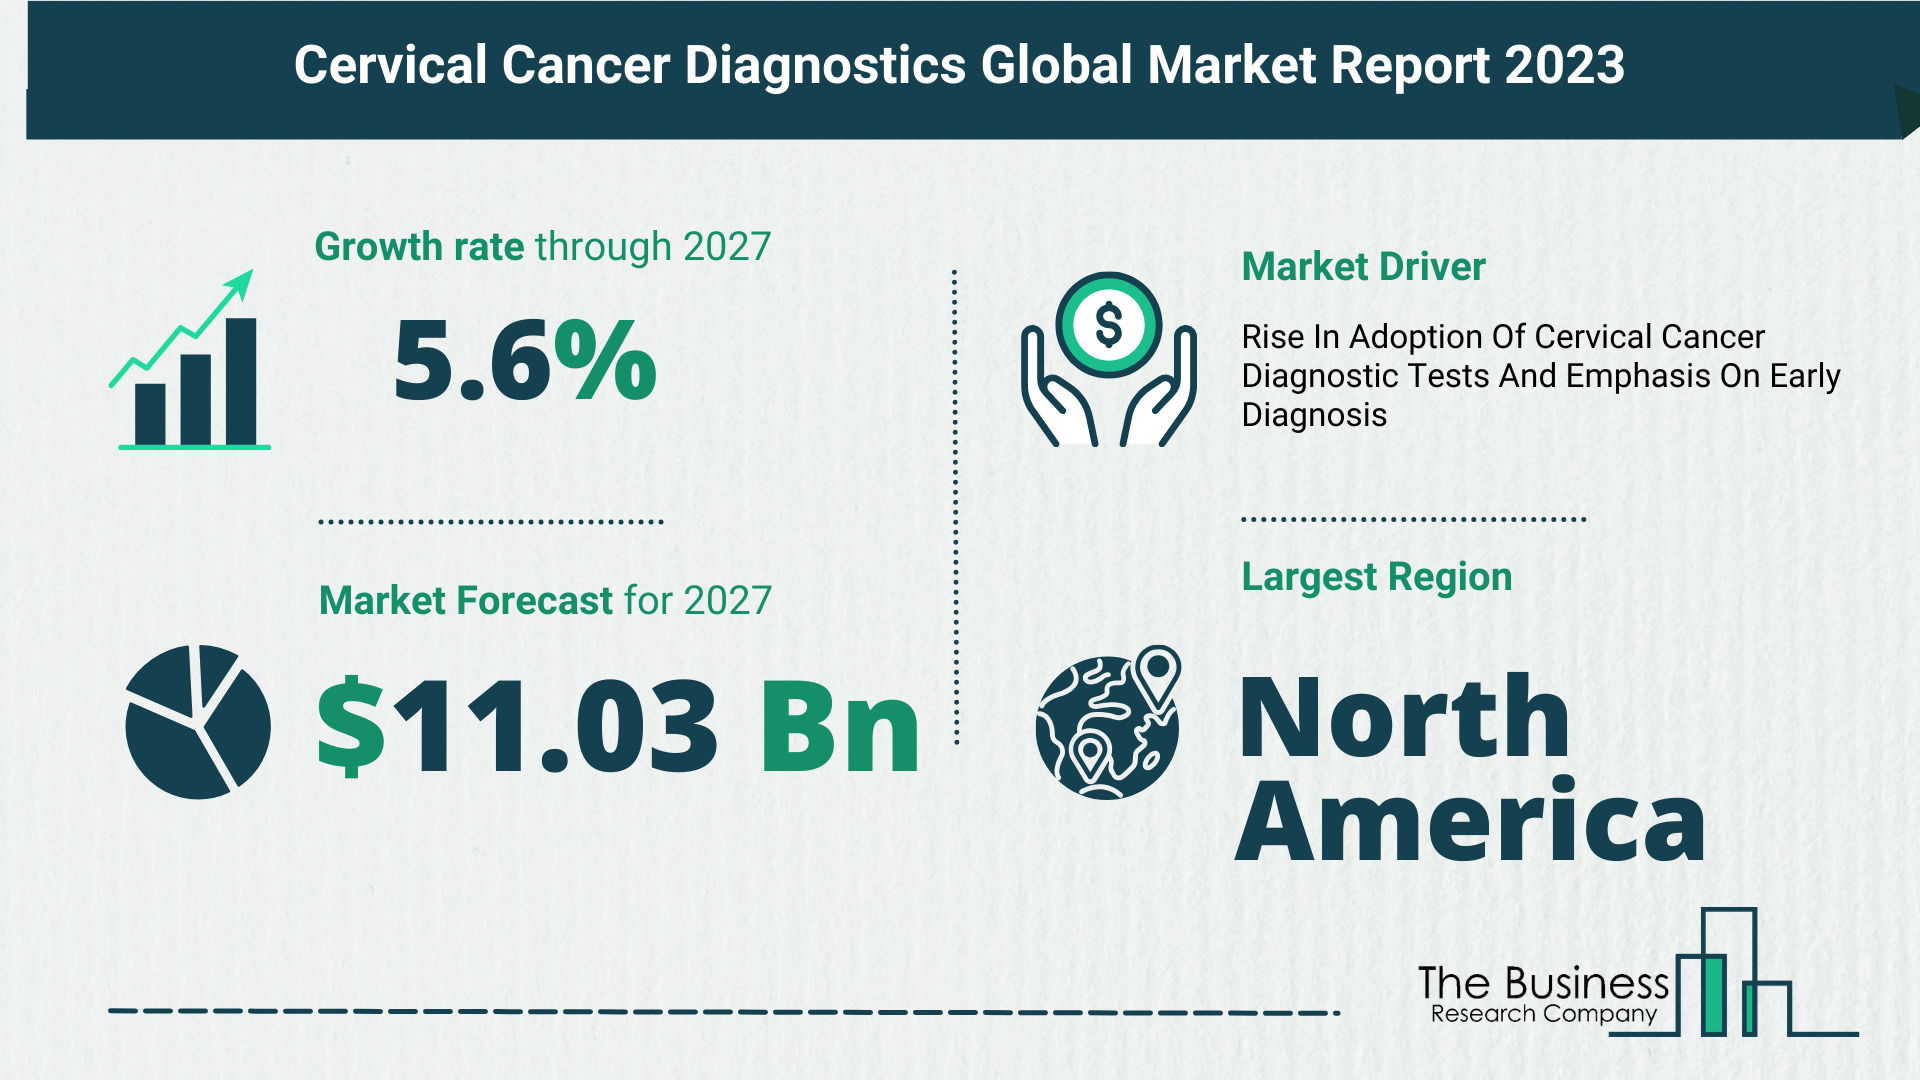 Global Cervical Cancer Diagnostics Market Analysis: Estimated Market Size And Growth Rate